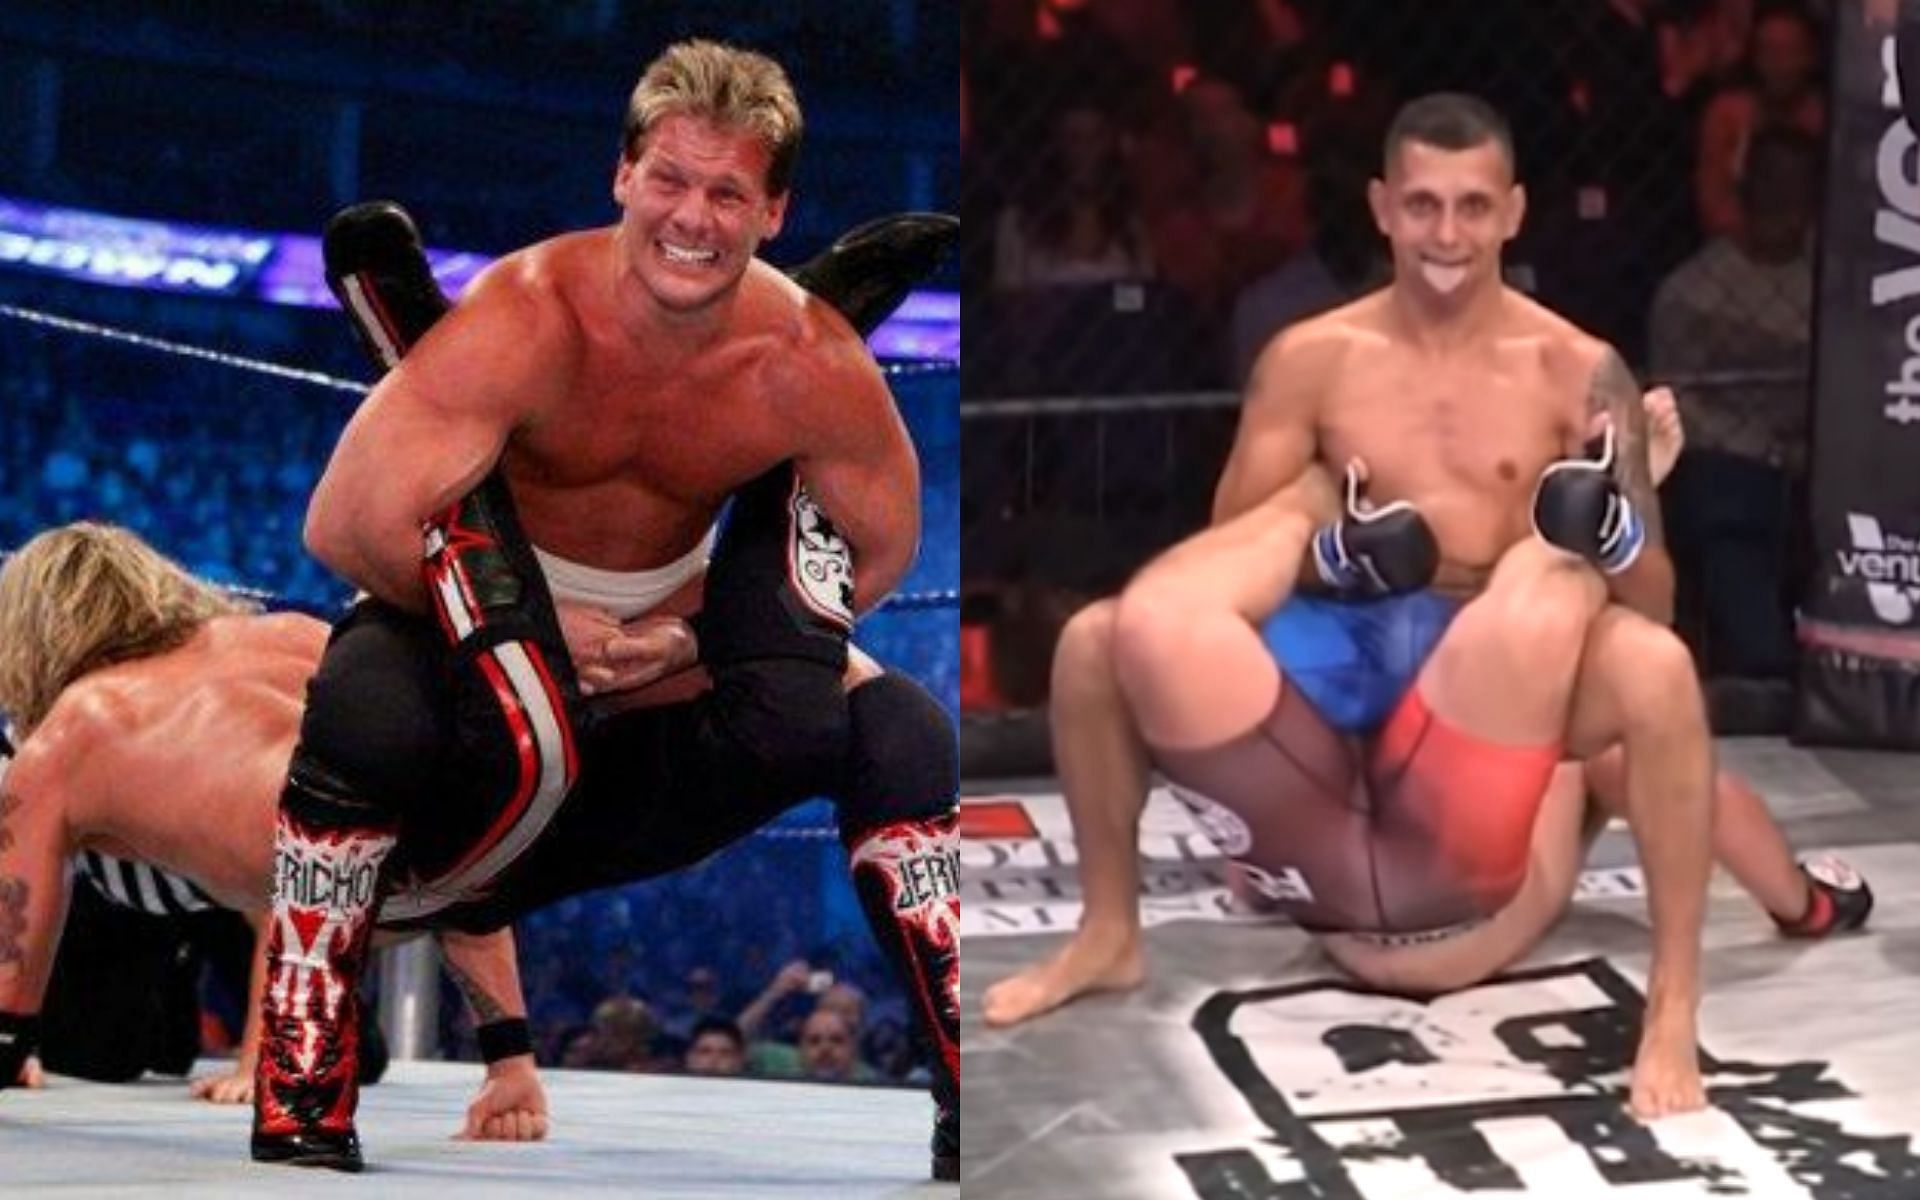 Chris Jericho (left), Jonno Mears (right) [Images courtesy: WWE.com and FCC - Full Contact Contender]